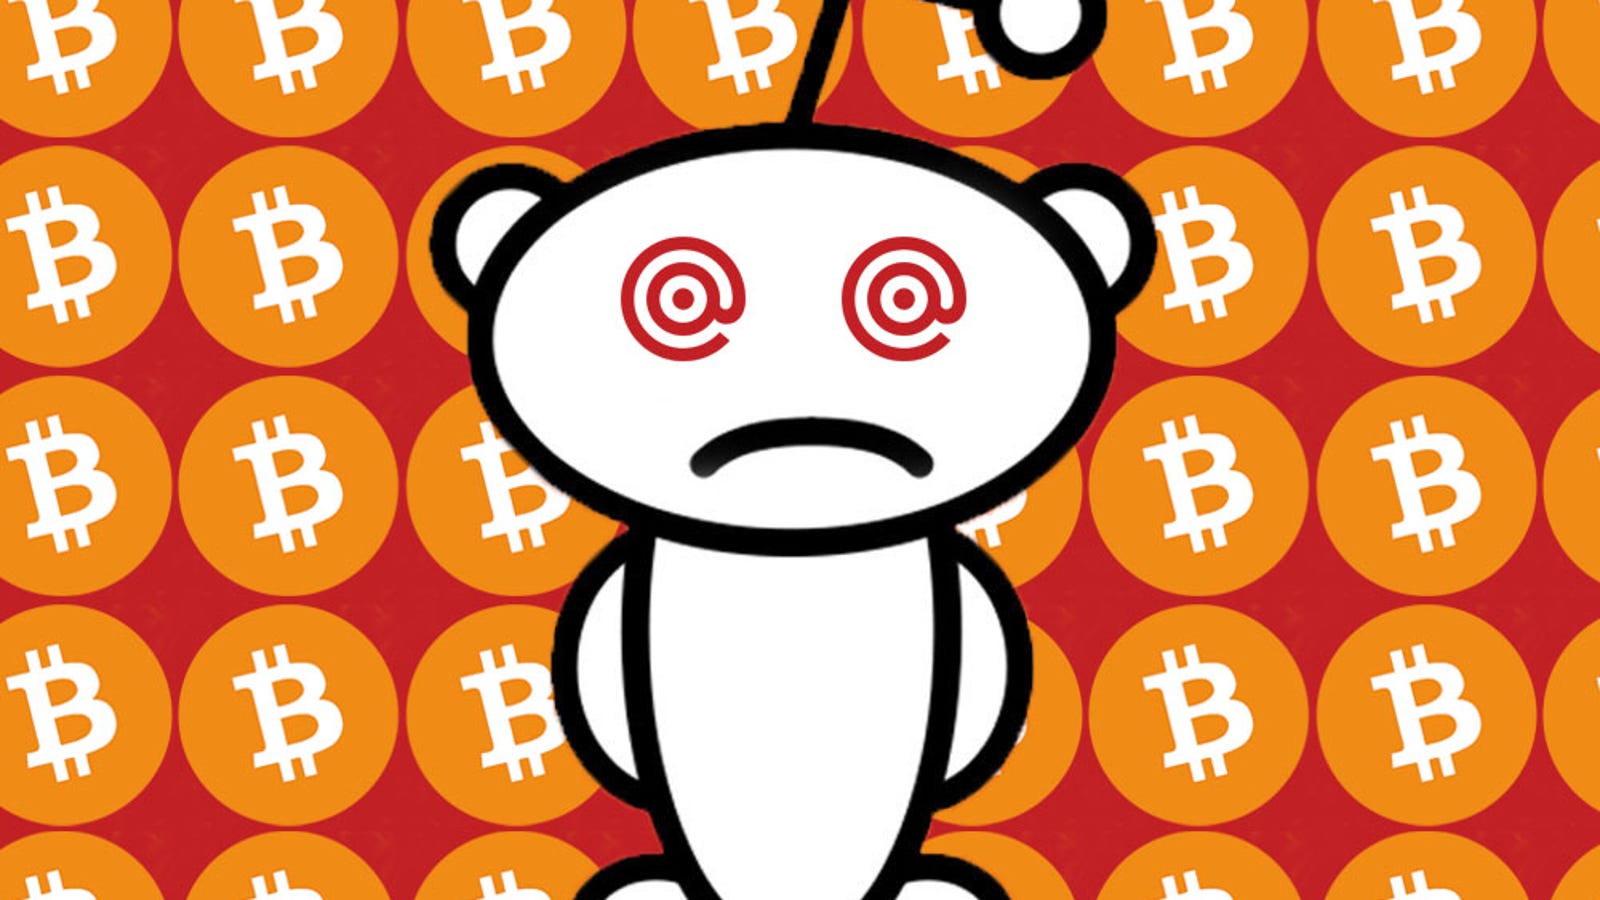 How A Reddit Email Vulnerability Led To Thousands In Stolen Bitcoin Cash - 